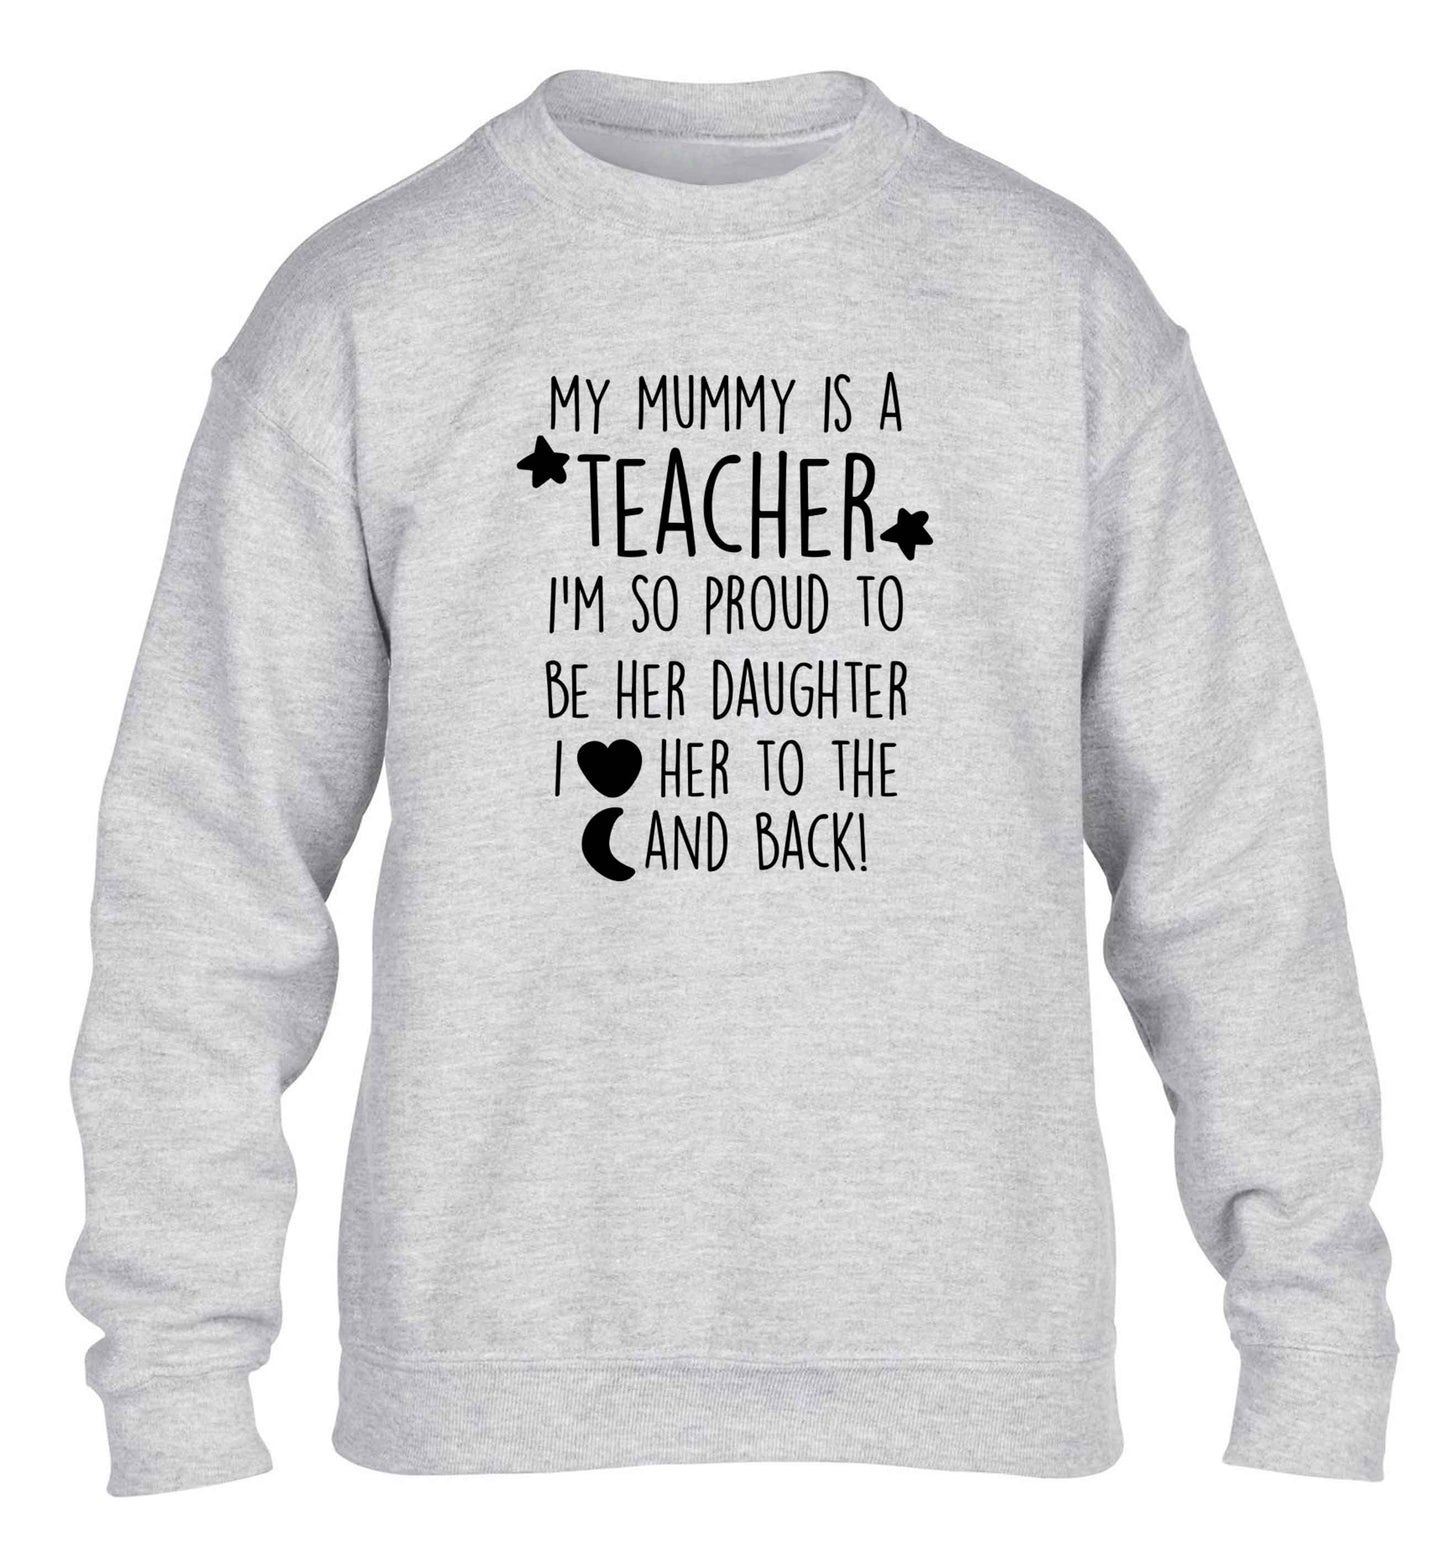 My mummy is a teacher I'm so proud to be her daughter I love her to the moon and back children's grey sweater 12-13 Years